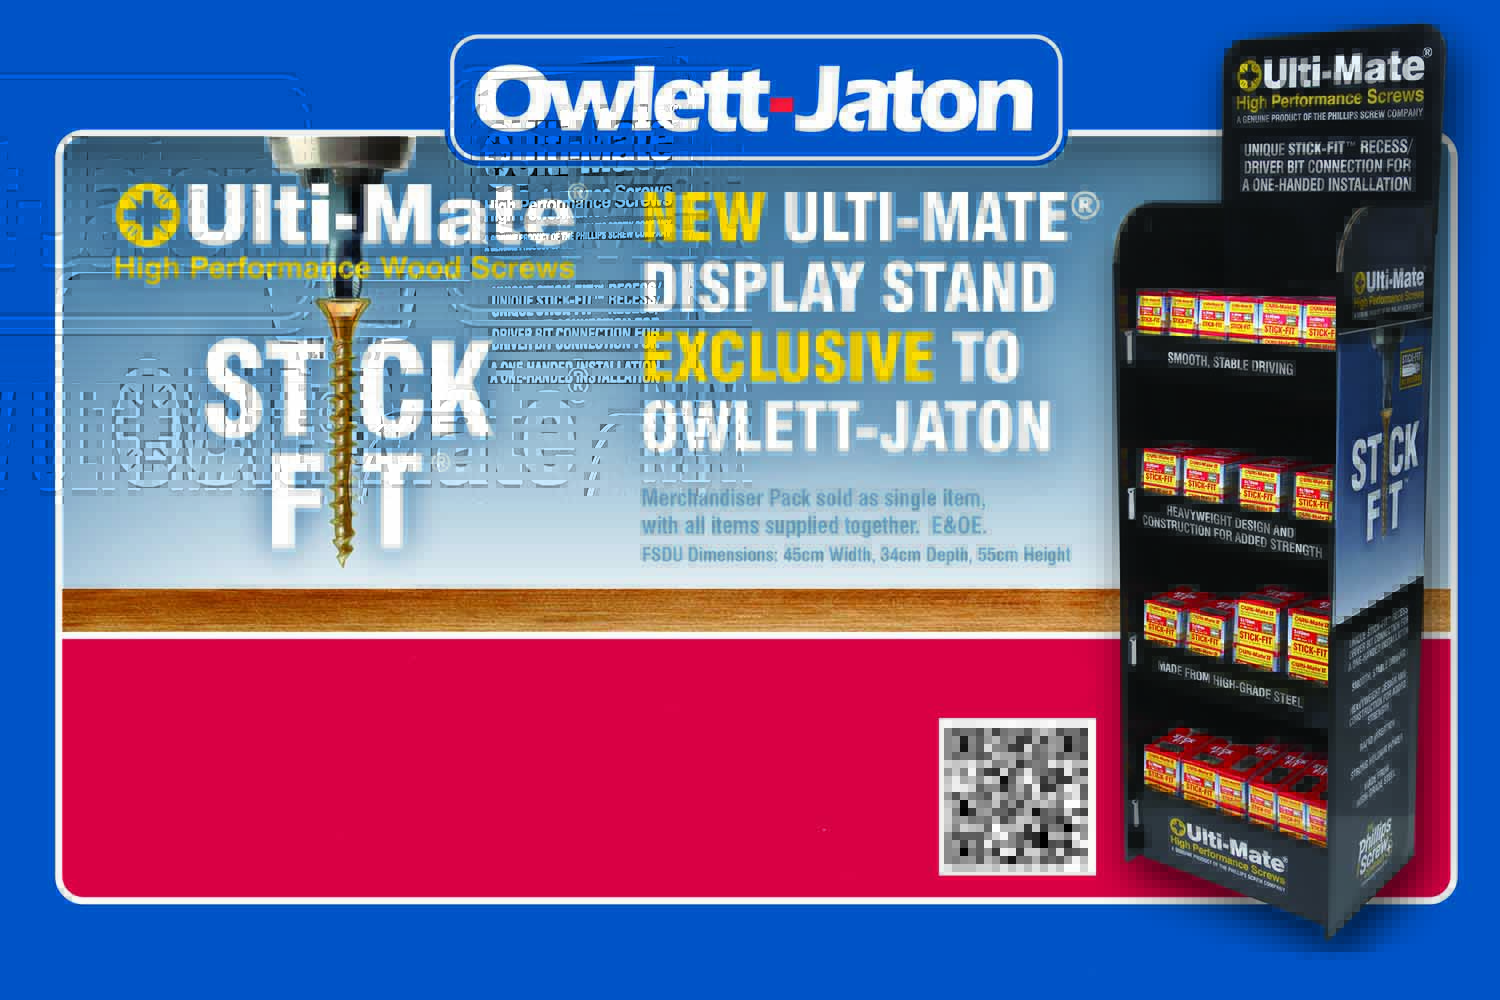 New Ulti-Mate® Display Stand Exclusive to Owlett-Jaton Customers